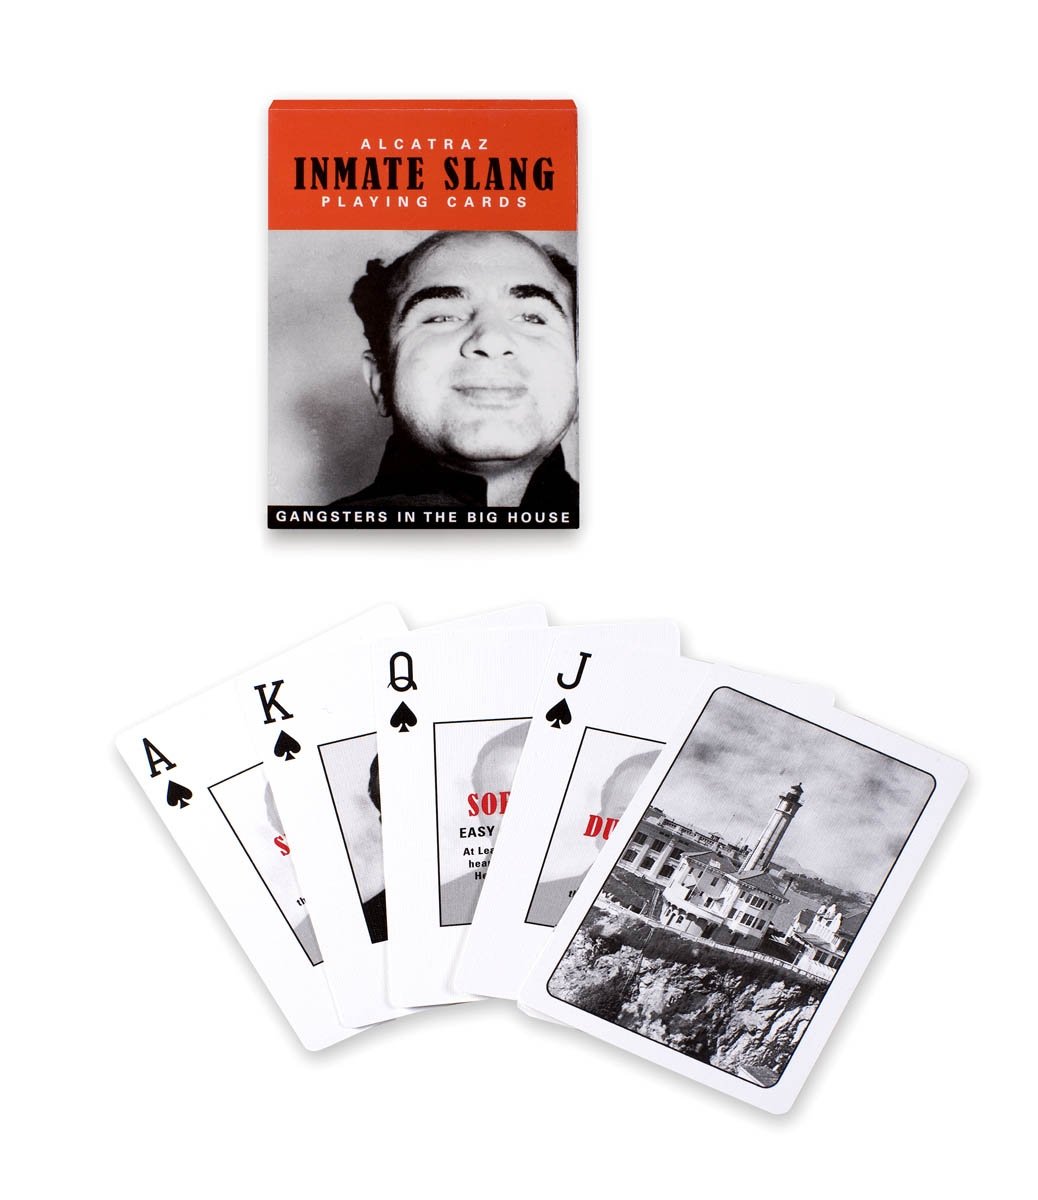 Alcatraz Inmate Slang playing cards, featuring facts and convict lingo from America's most infamous prison.